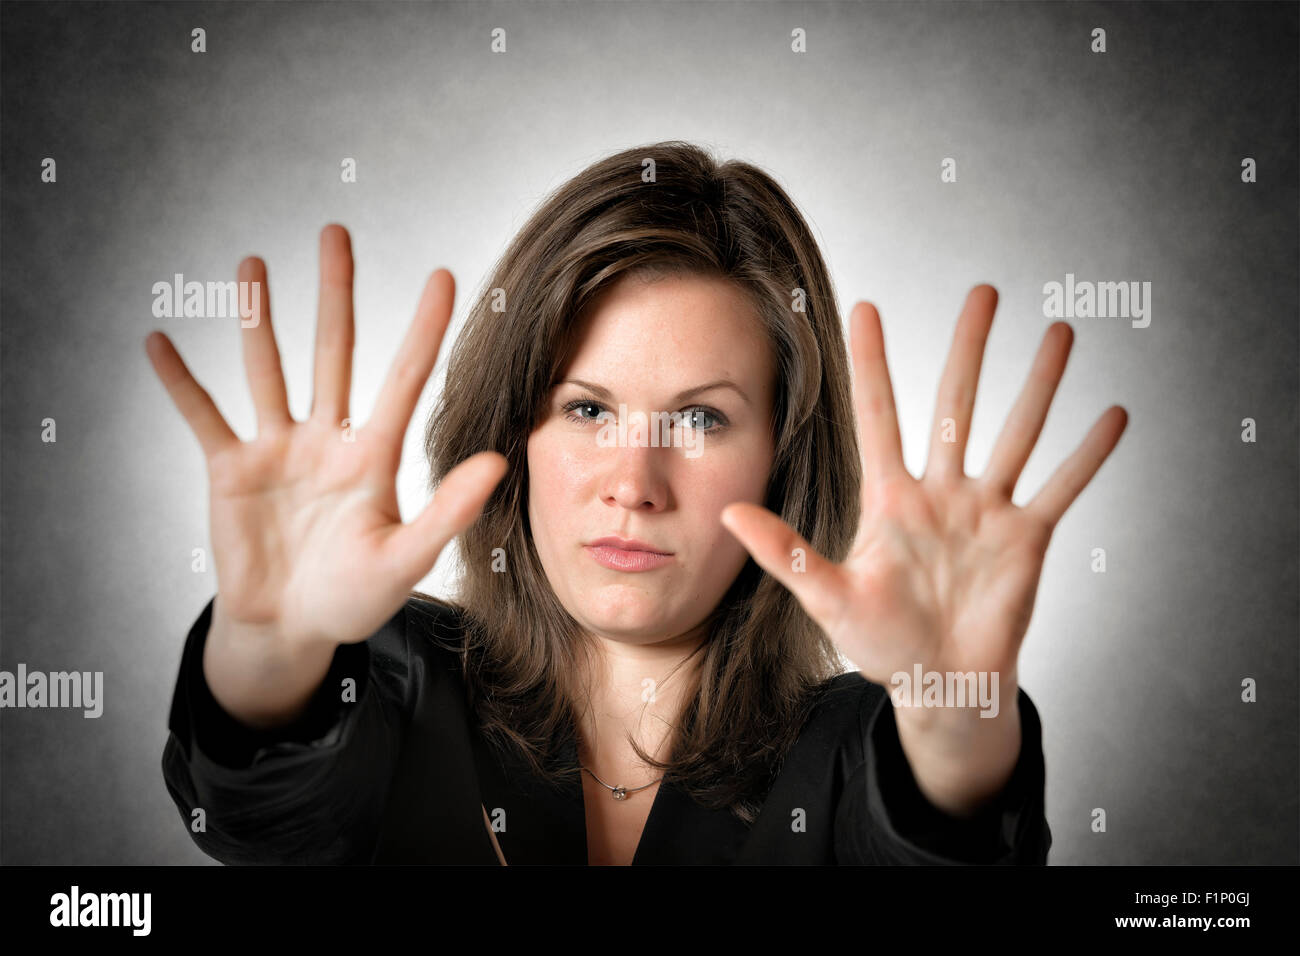 Business woman in black suit holds both hand up to stop someone or something Stock Photo